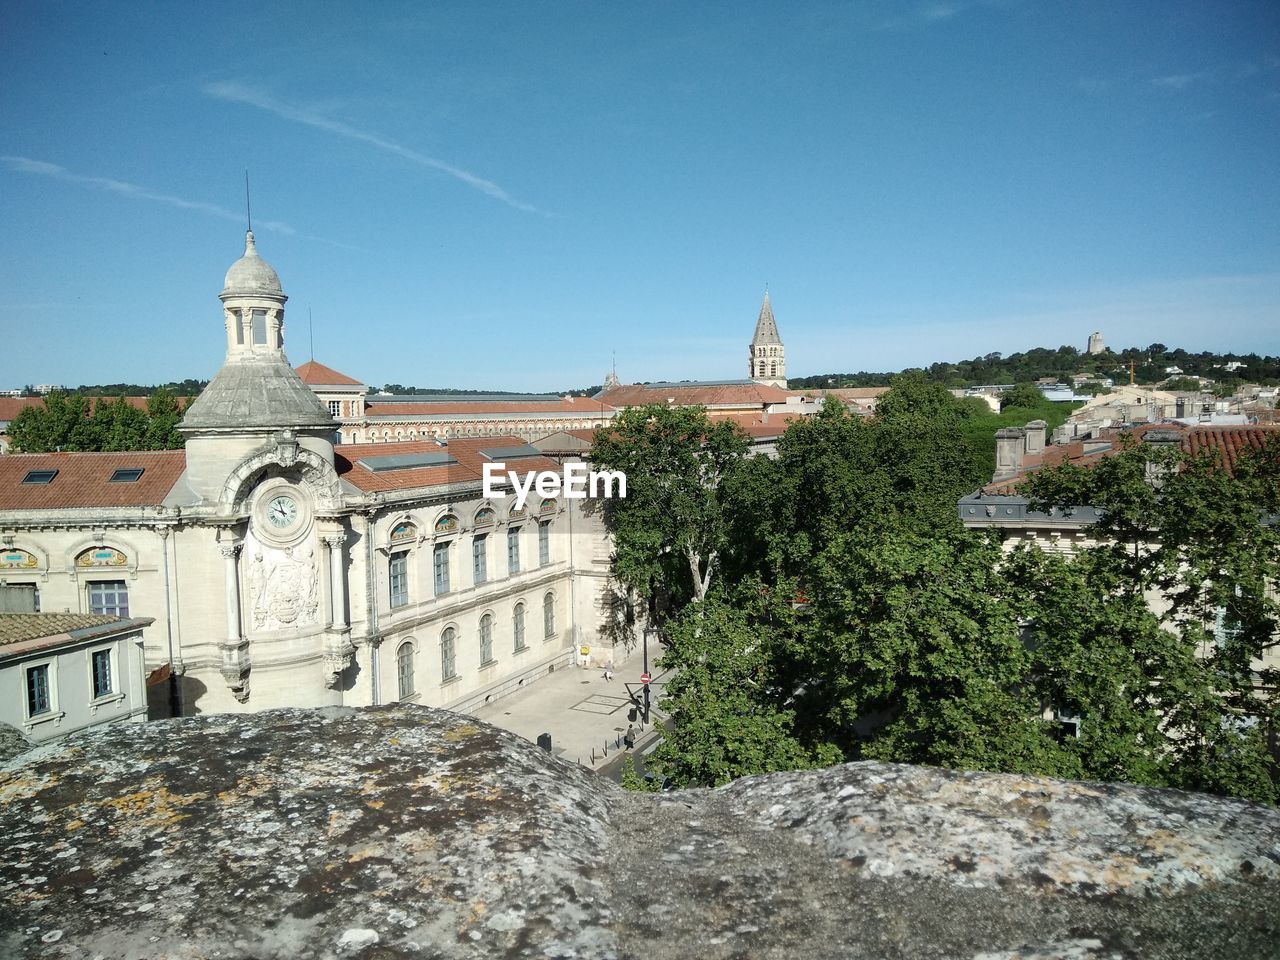 PANORAMIC VIEW OF TEMPLE AND BUILDINGS AGAINST SKY